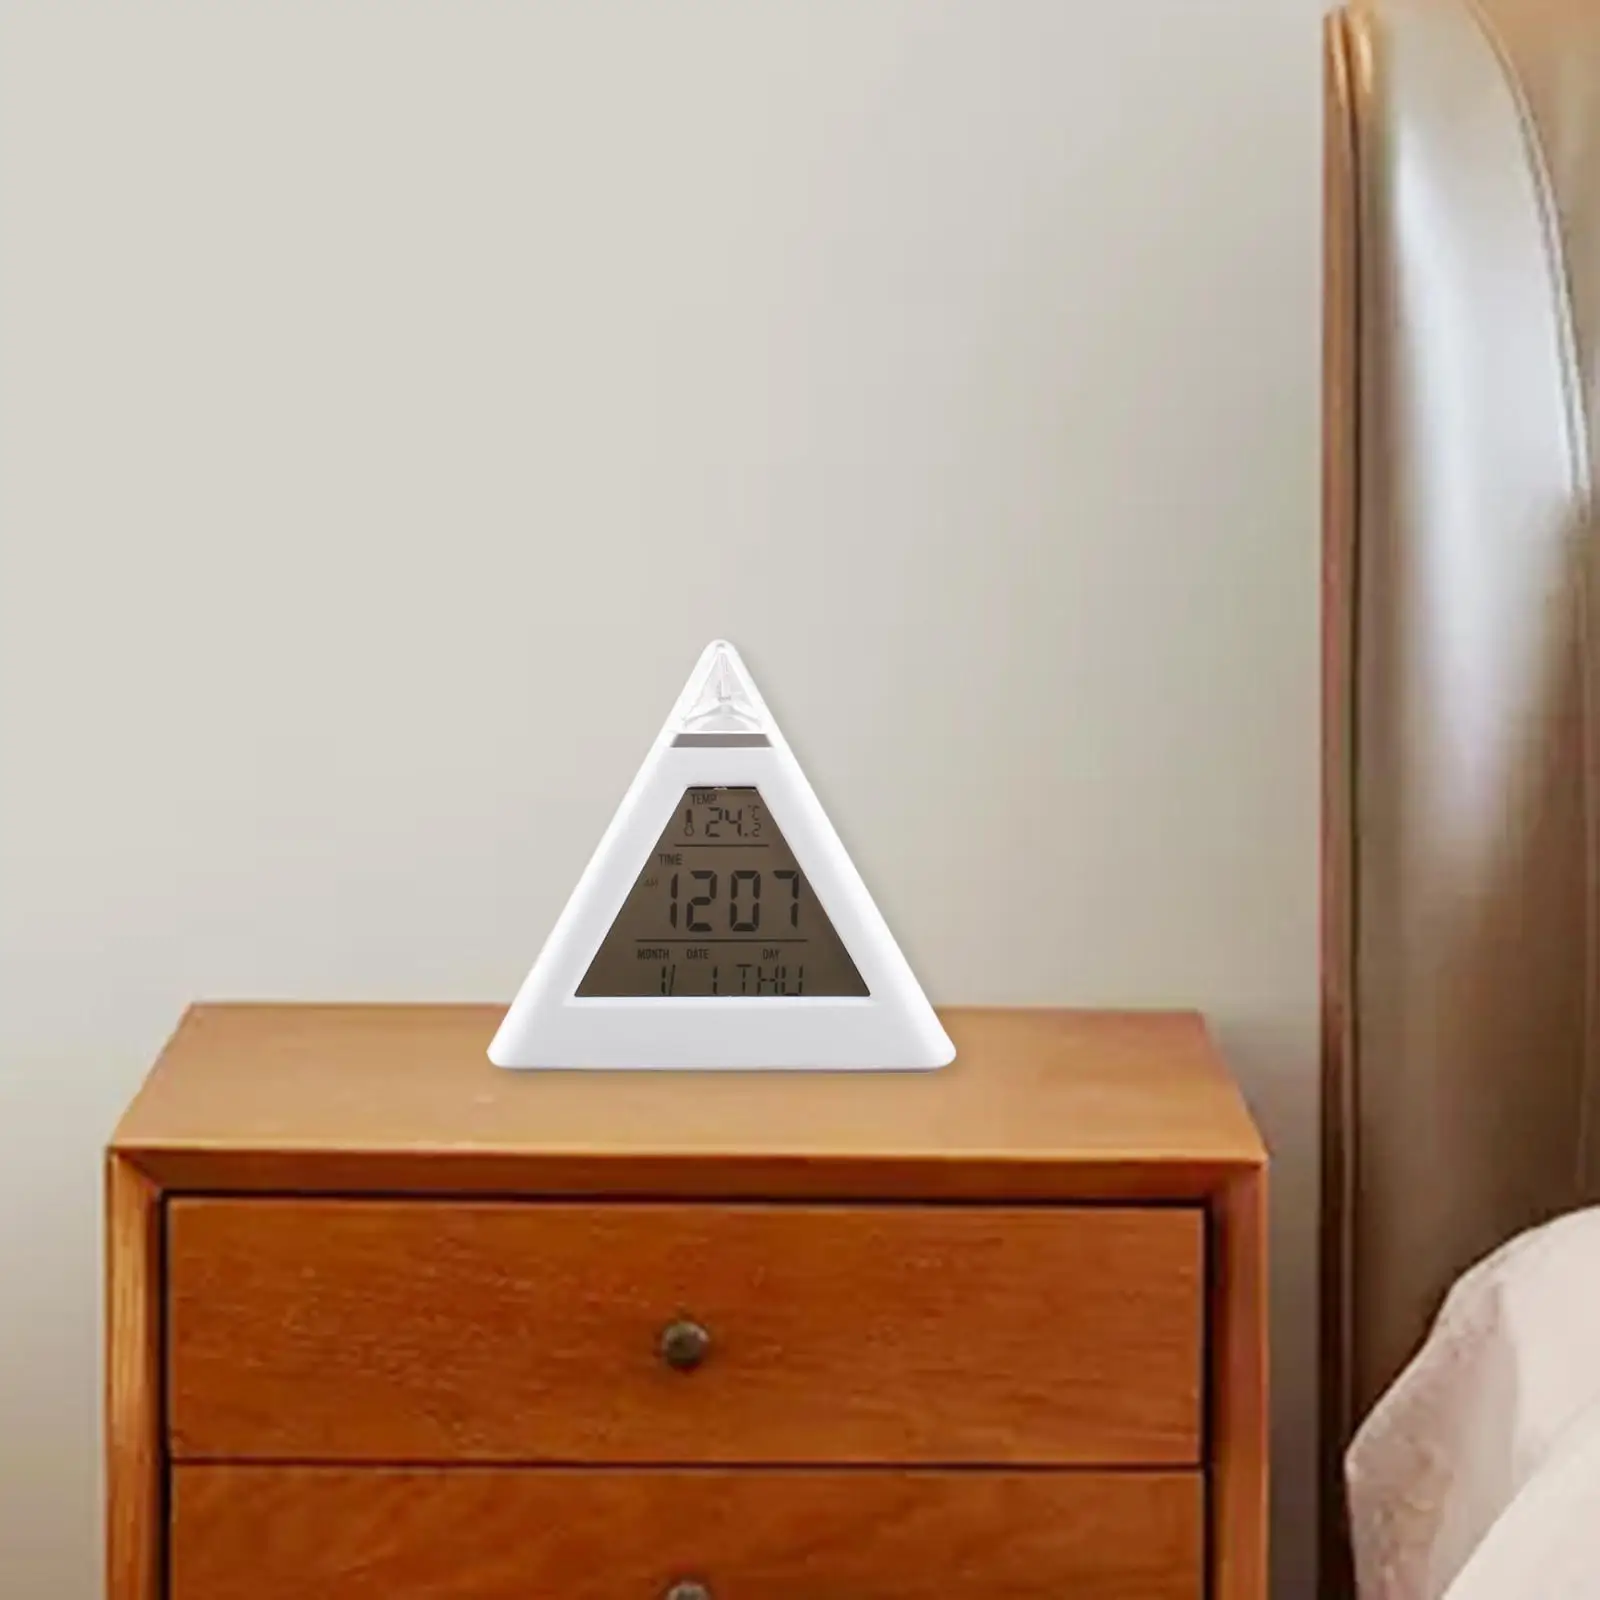 LED Triangle  Snooze Function Night Light Changing  Desk Clock for  Gifts Home Adults Kids